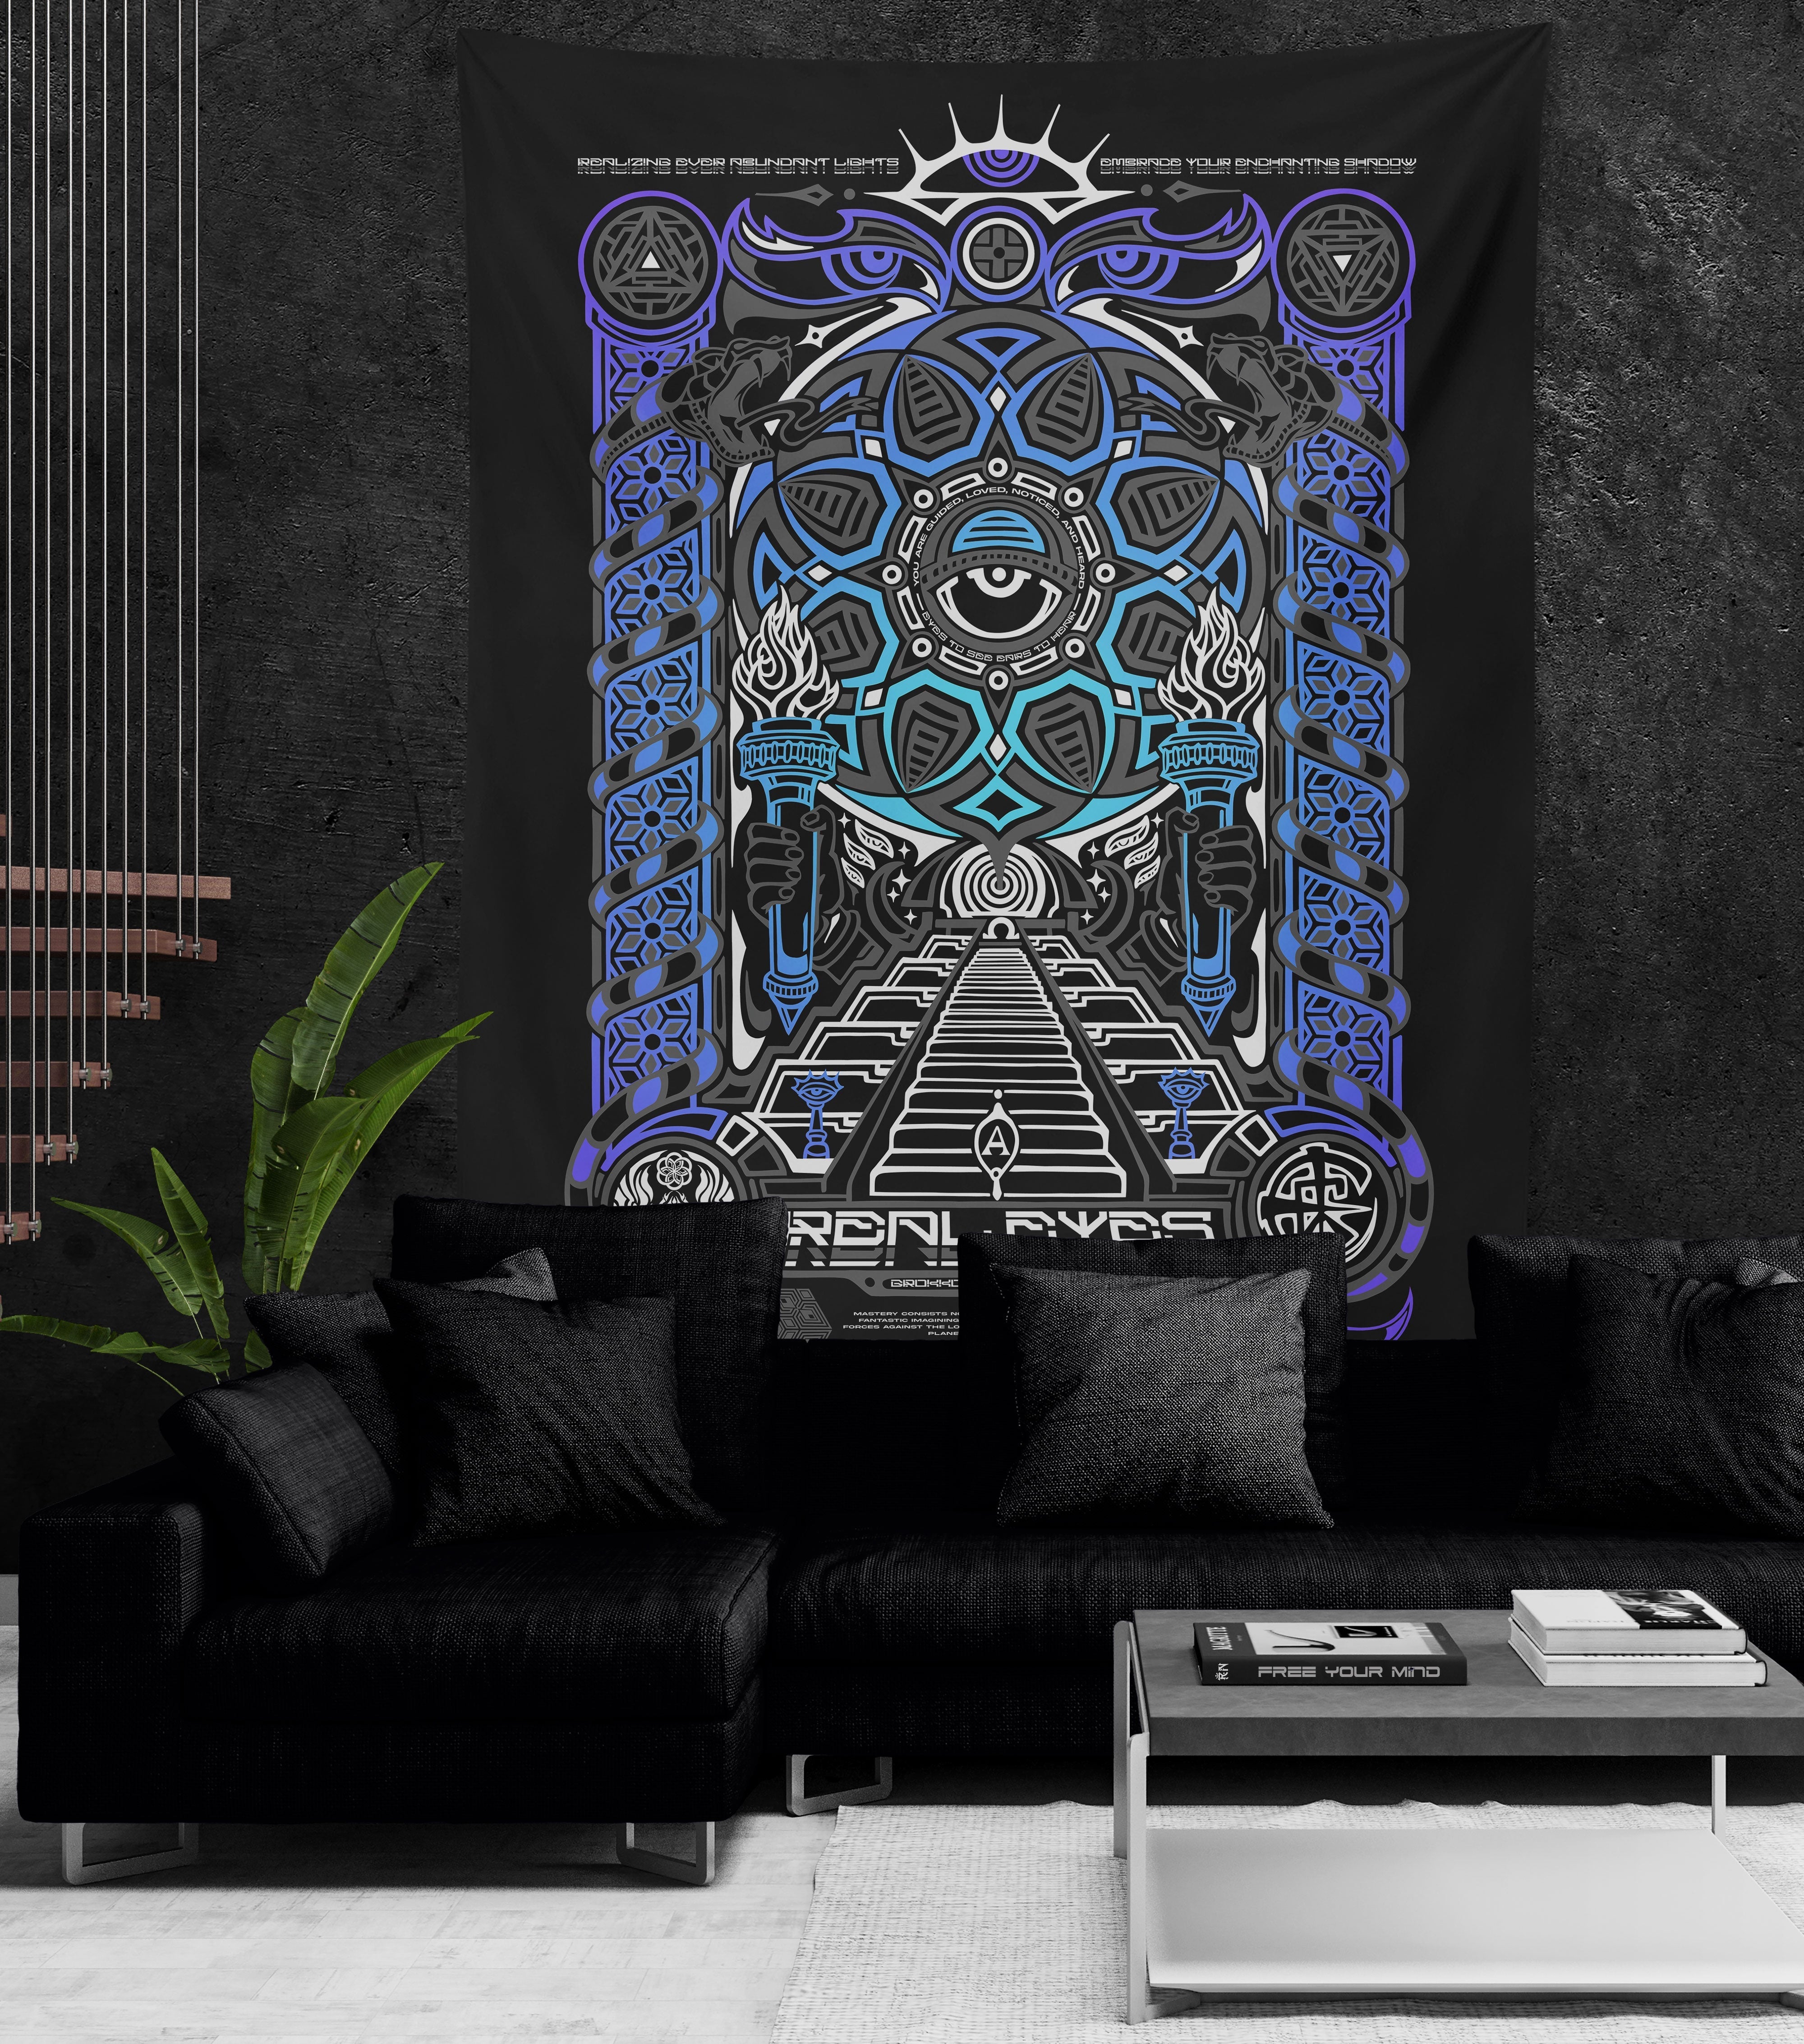 REAL EYES 2.0 ✦ GROKKO ✦ 111 Limited Edition Tapestry Tapestry 